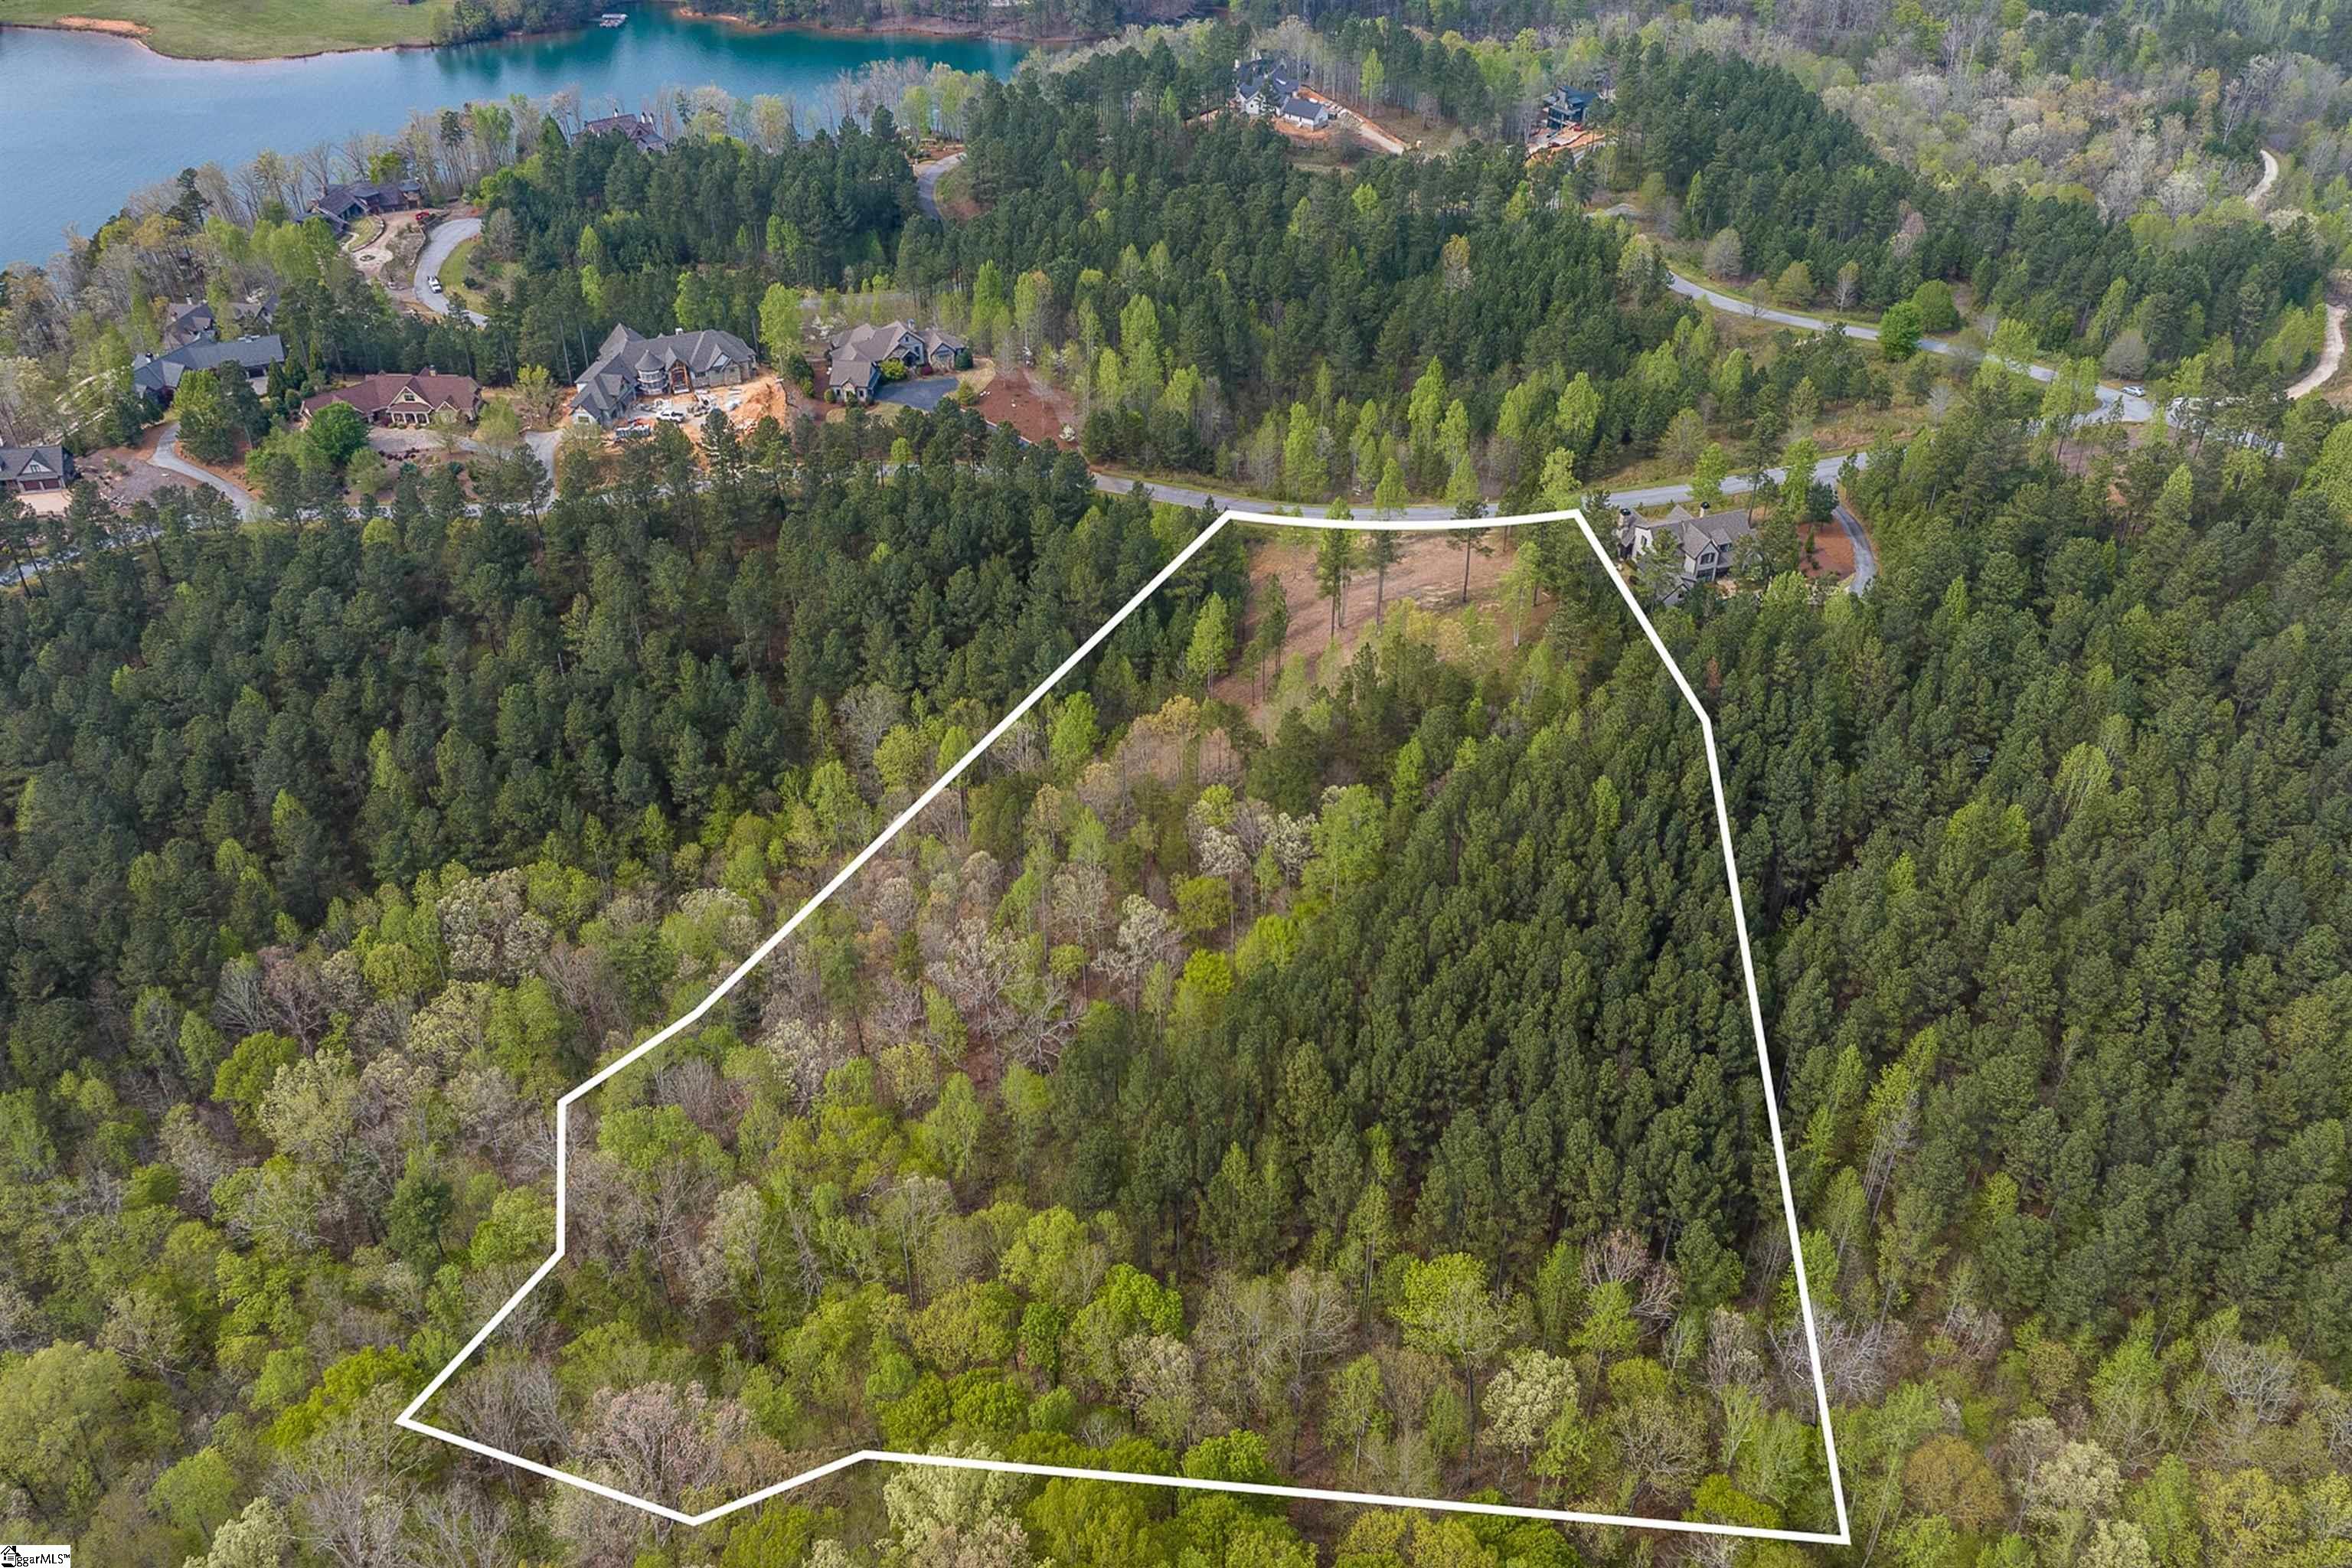 Exceptional value for layered mountain views from a higher elevation where you will capture the breeze and delight in the changing of the seasons. Expansive views of the Blue Ridge and Lake Keowee from this conveniently located, Keowee Springs home site. Only seconds away from the golf course, beach club and future clubhouse location. A broad, expansive and level build site won't impact the building budget and impressive views will be found from the main and upper floors. The Cliffs at Keowee Springs enjoys Fazio golf and the “beach club” swim complex plus all the other amenities that are included with a Cliffs membership. The proximity to Clemson allows this Cliffs Community to enjoy easy access to shopping, restaurants and college town activities while living in a spectacular gated community. Membership is available with separate purchase.